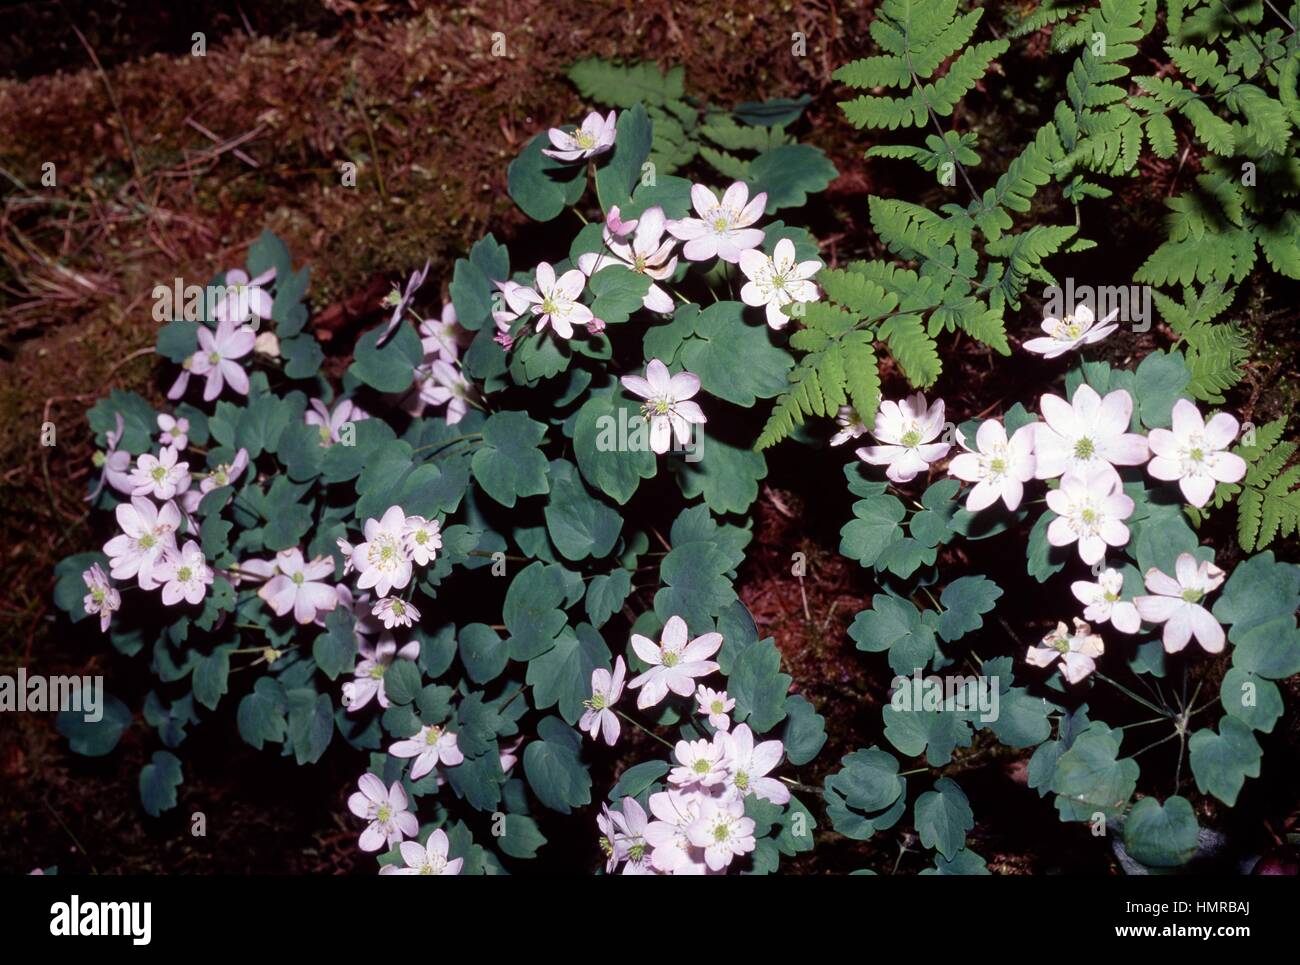 Rue anemone (Anemonella thalictroides or Isopyrum thalictroides), Ranunculaceae. Stock Photo